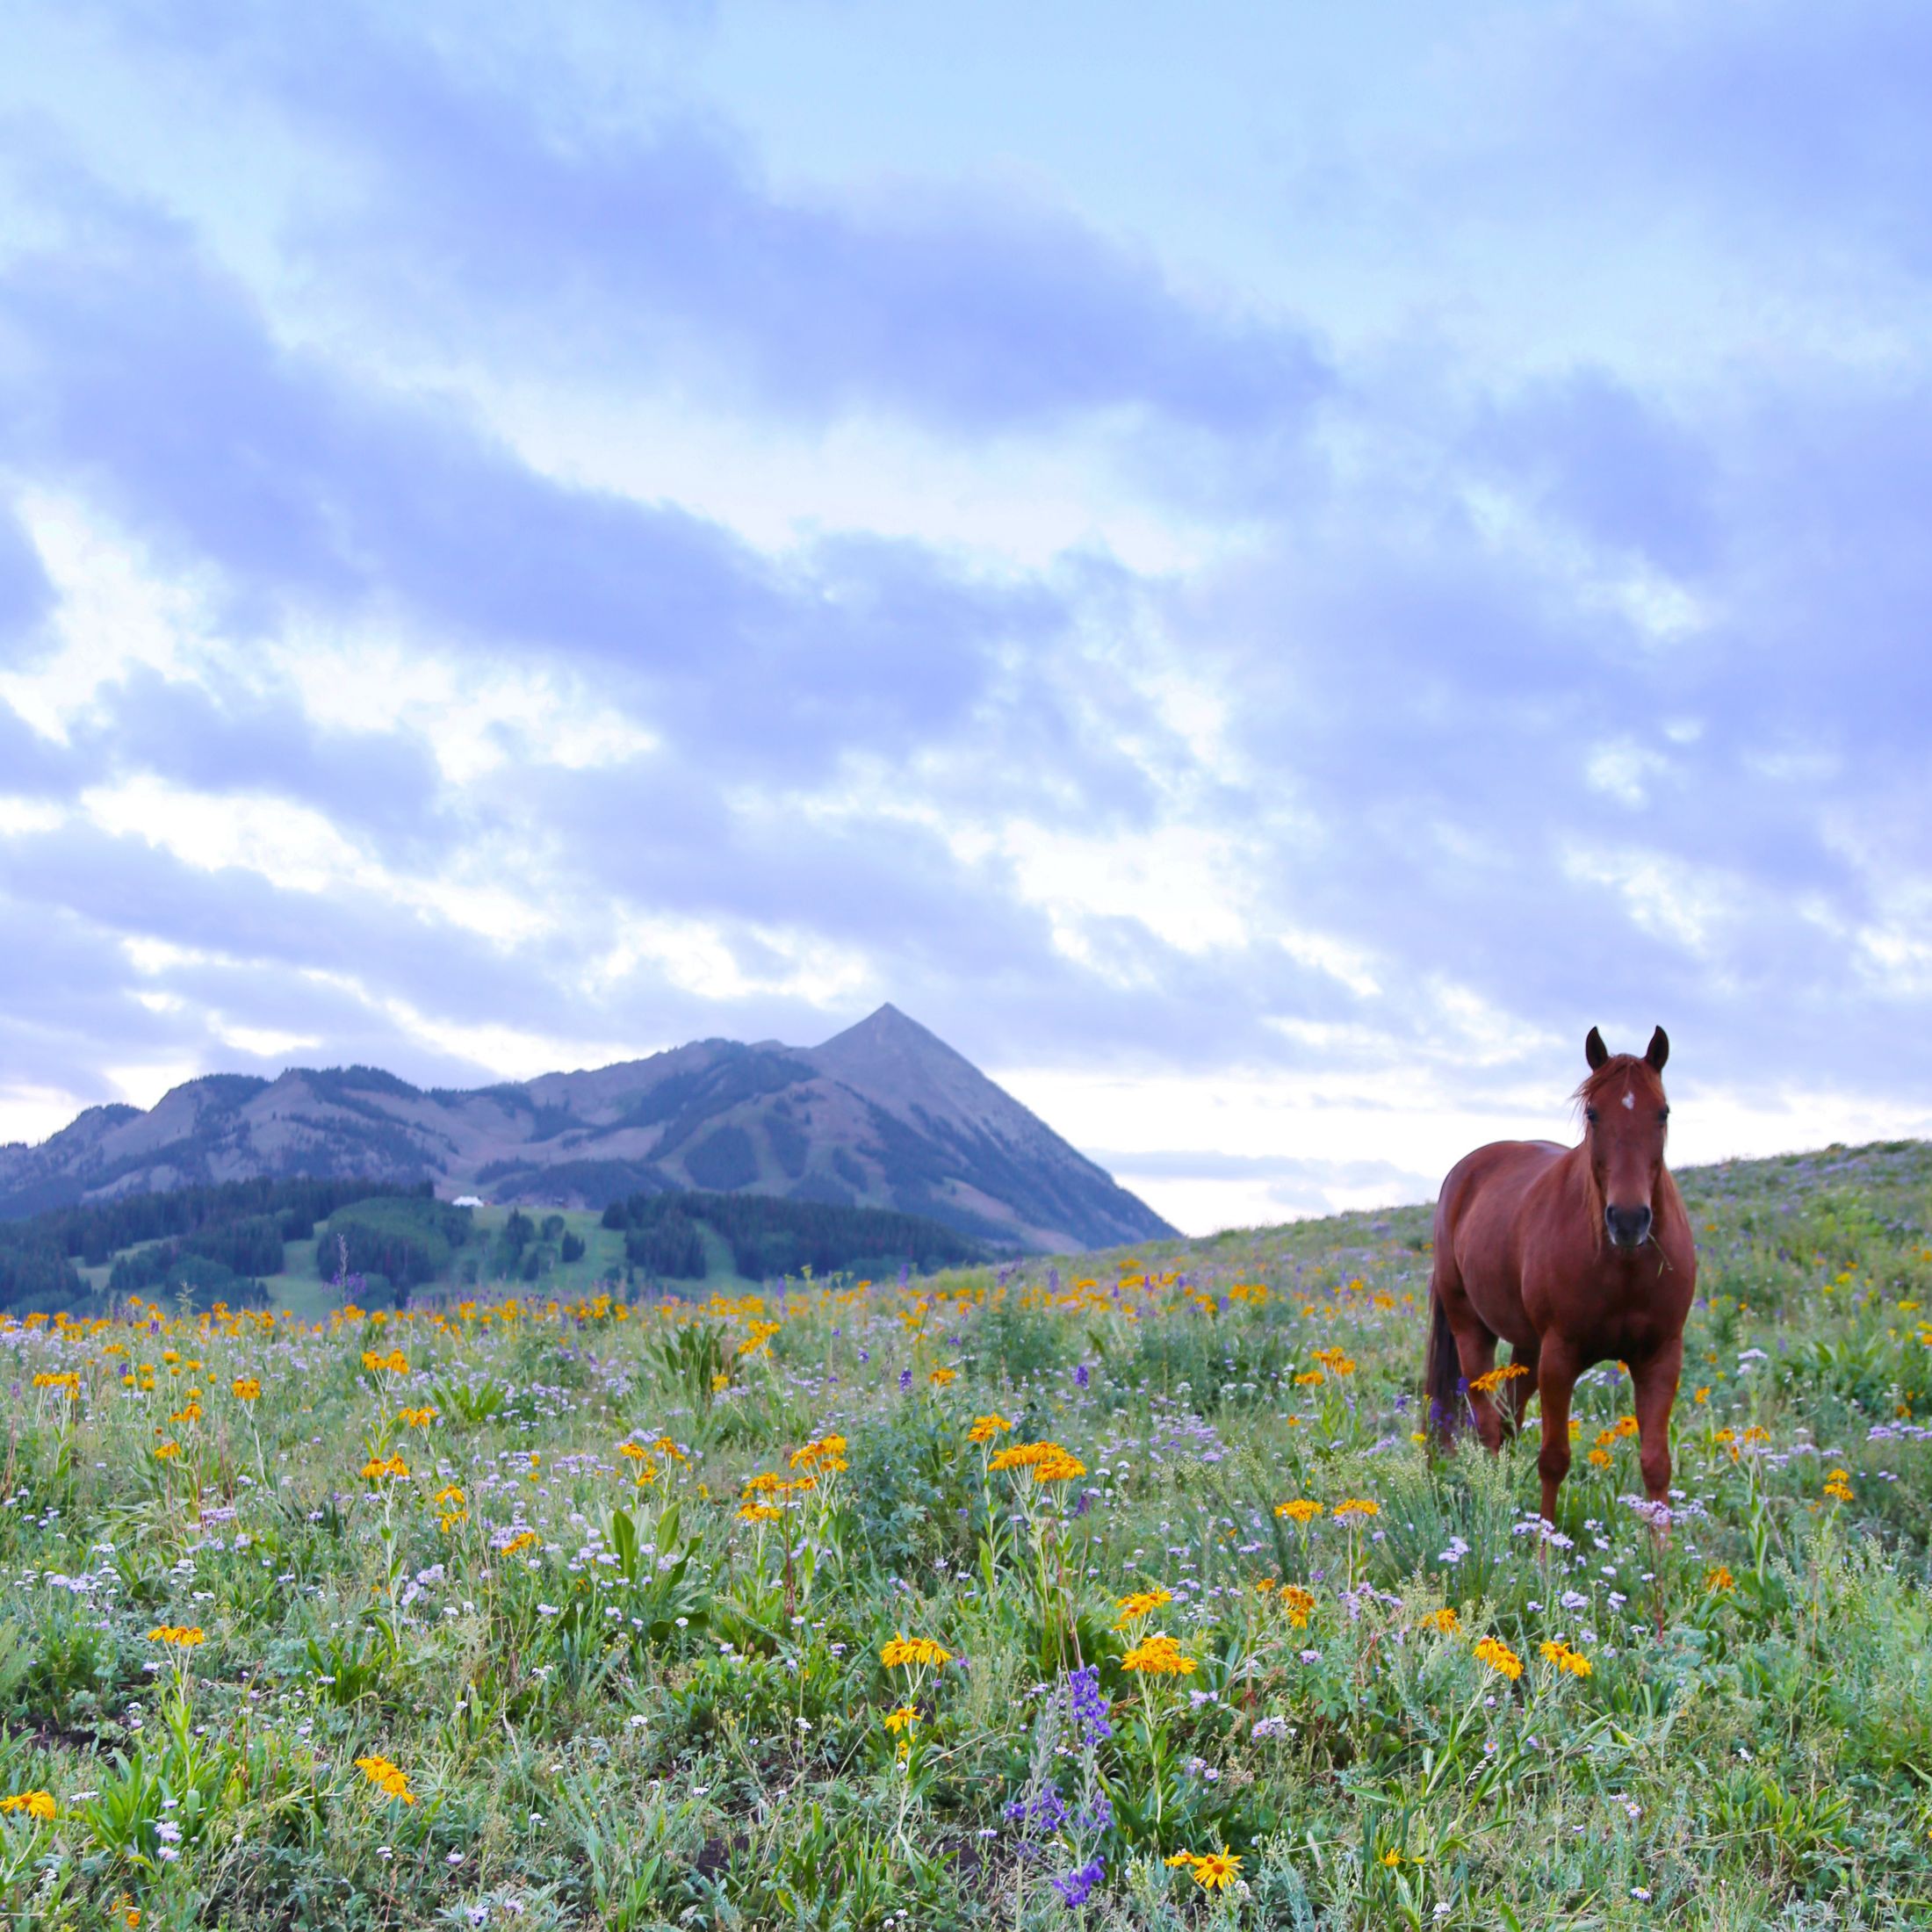 A horse walking on grass with wildflowers and blue mountains in the distance.